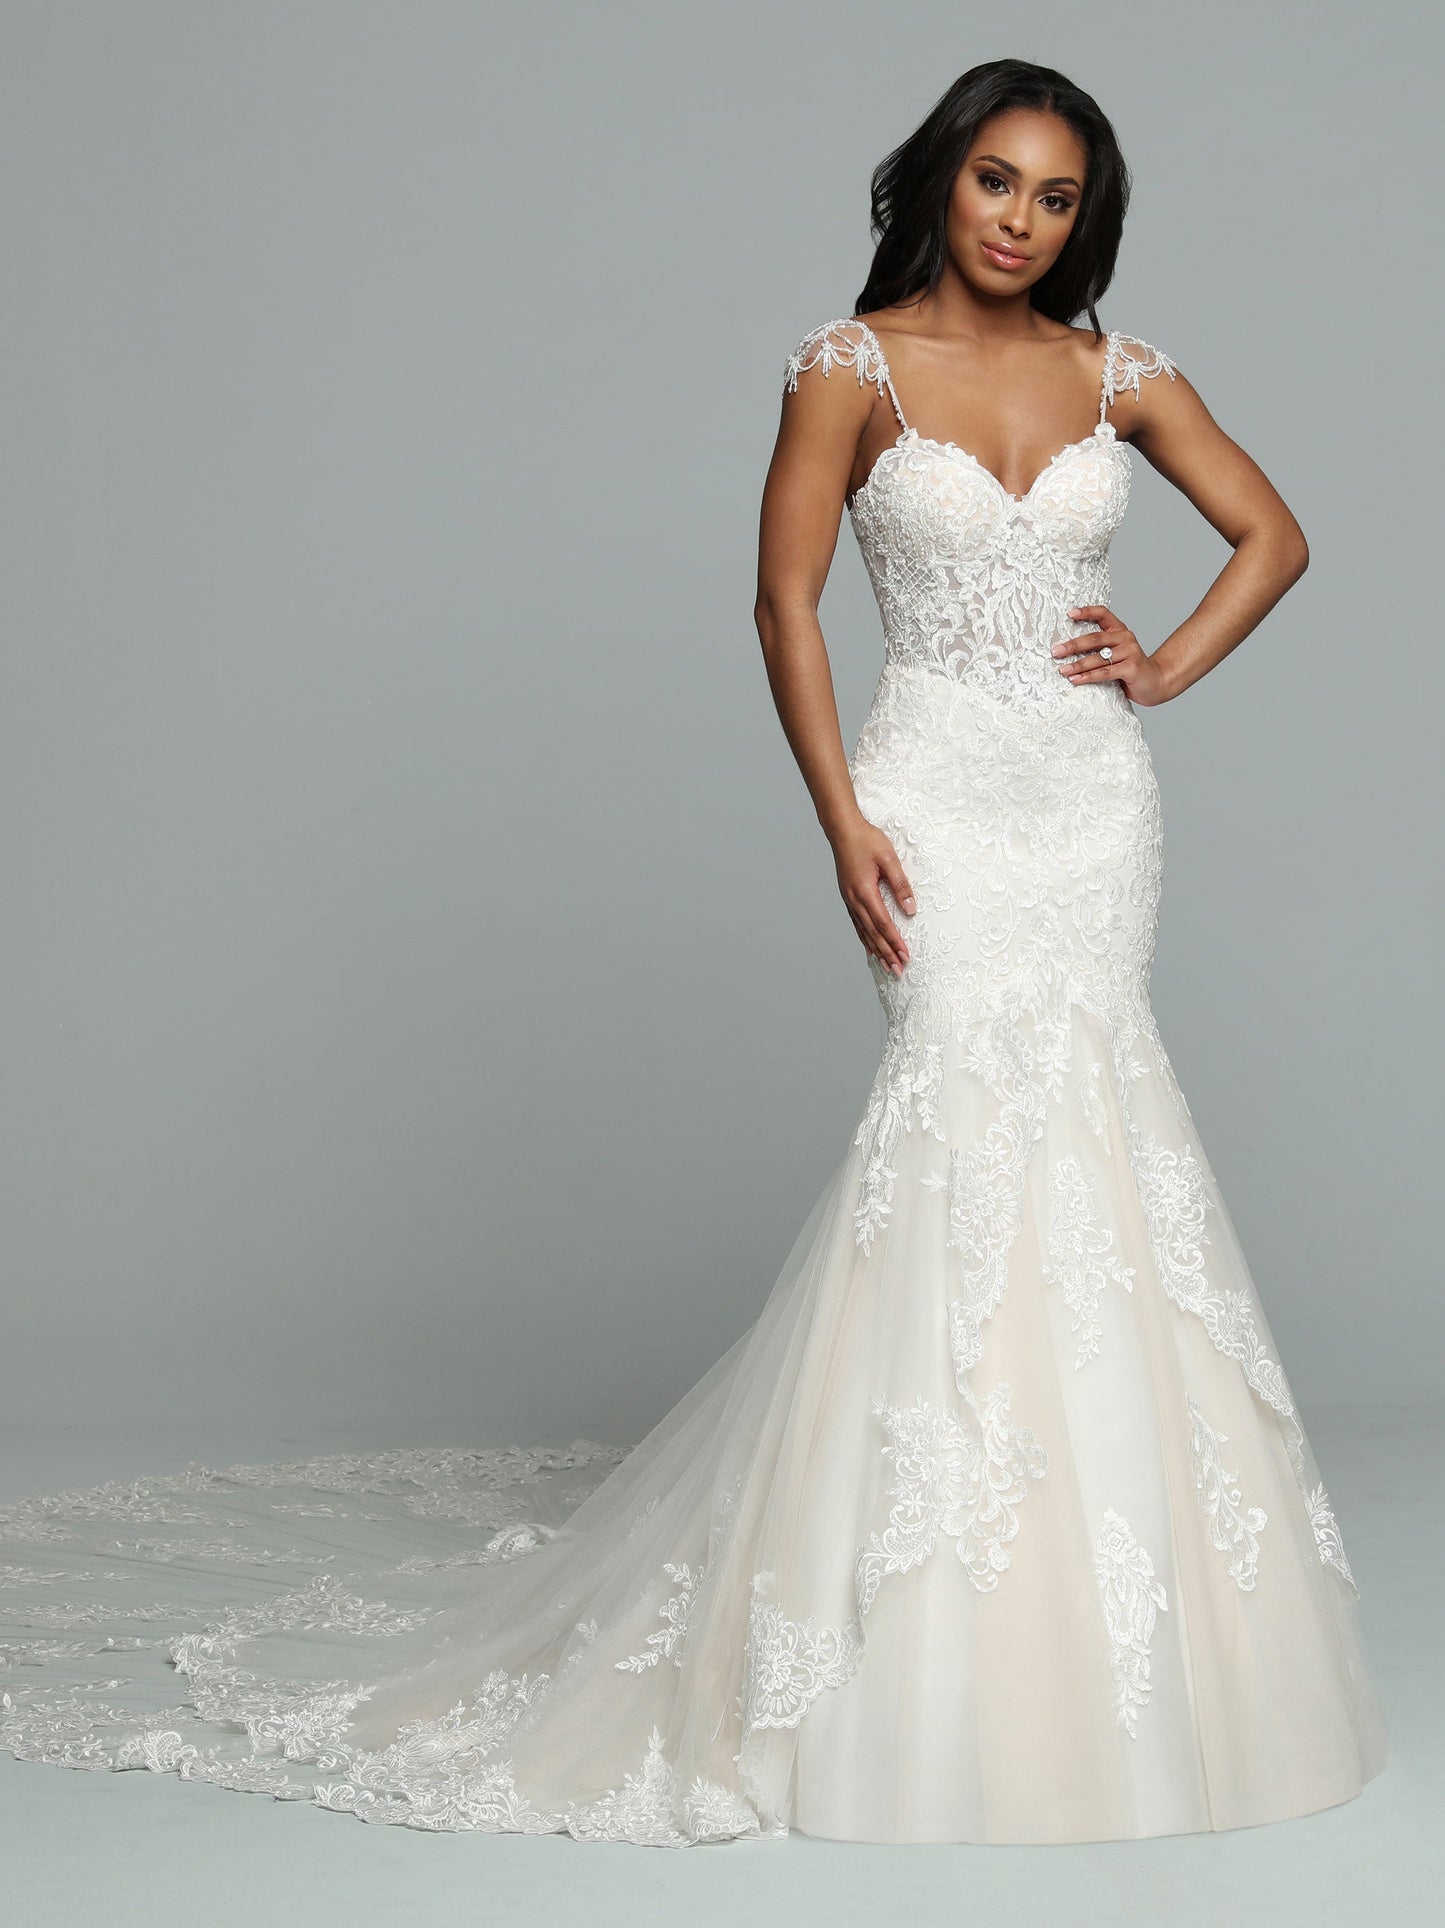 Davinci Bridal 50662 is a stunning long lace formal wedding dress. mermaid silhouette with a sheer lace corset bodice and crystal cap sleeves. Long double layered train with lace embellishments.  Available Size: 14  Available Color: Ivory/Ivory